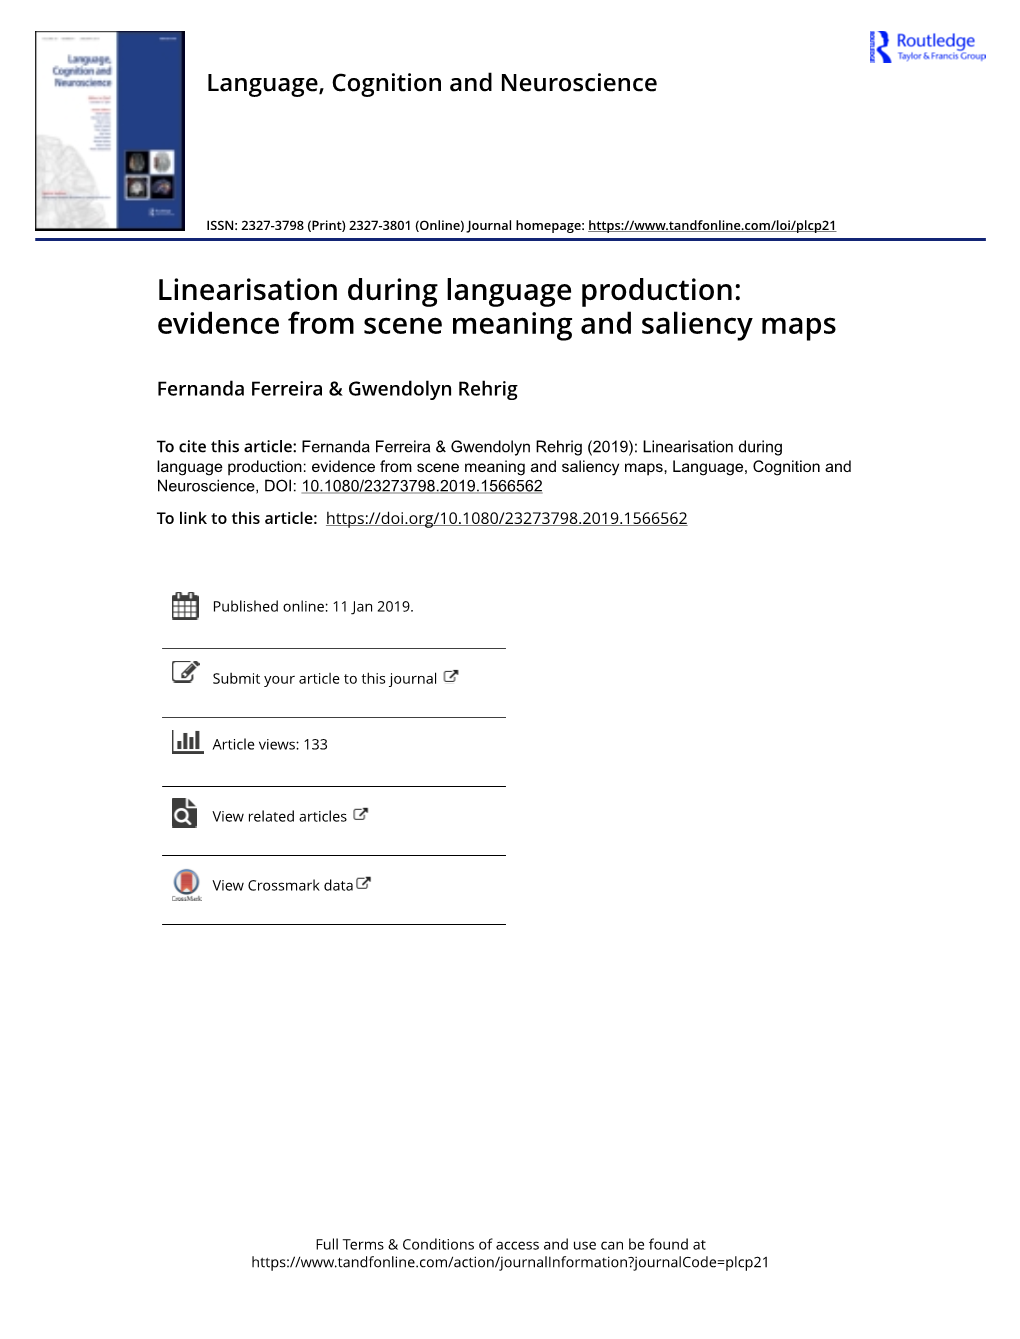 Linearisation During Language Production: Evidence from Scene Meaning and Saliency Maps